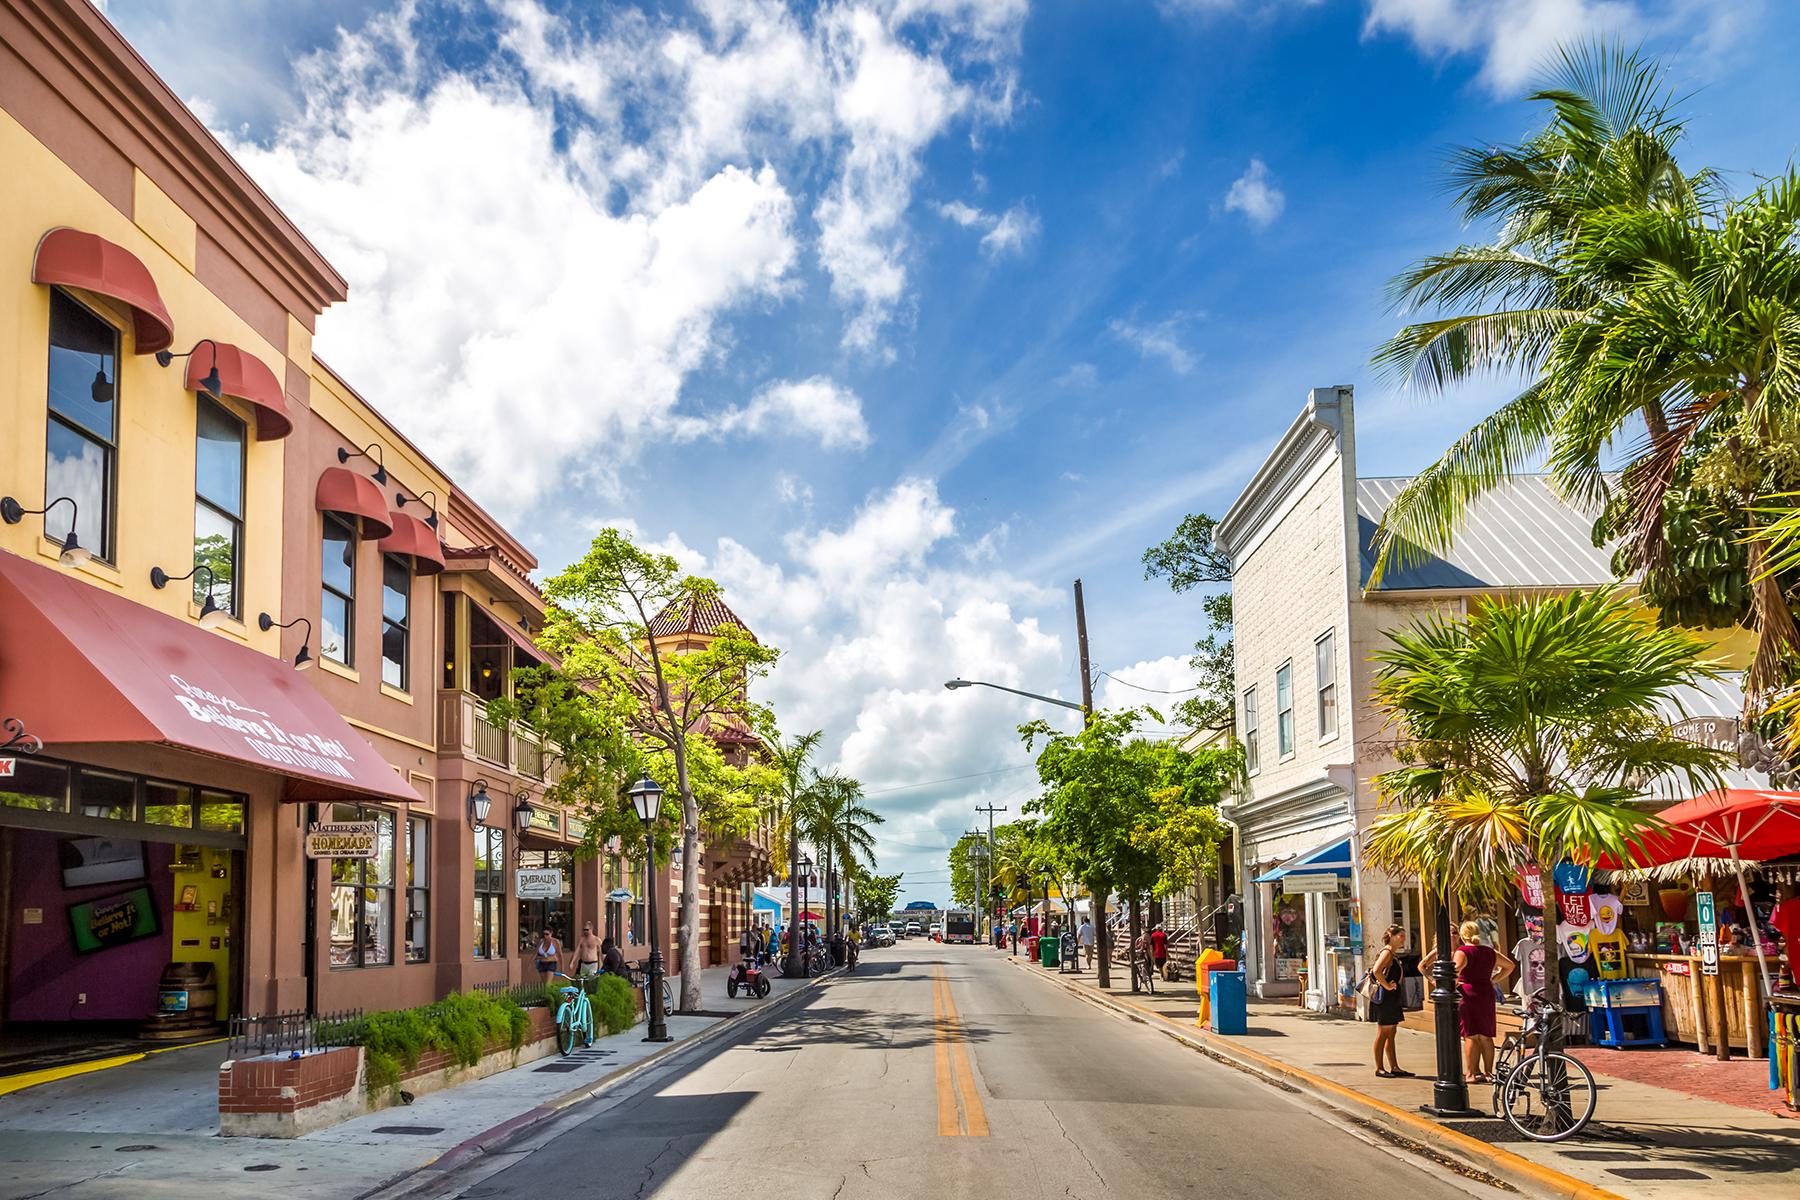 Don't Do These Things While Visiting Key West, Florida